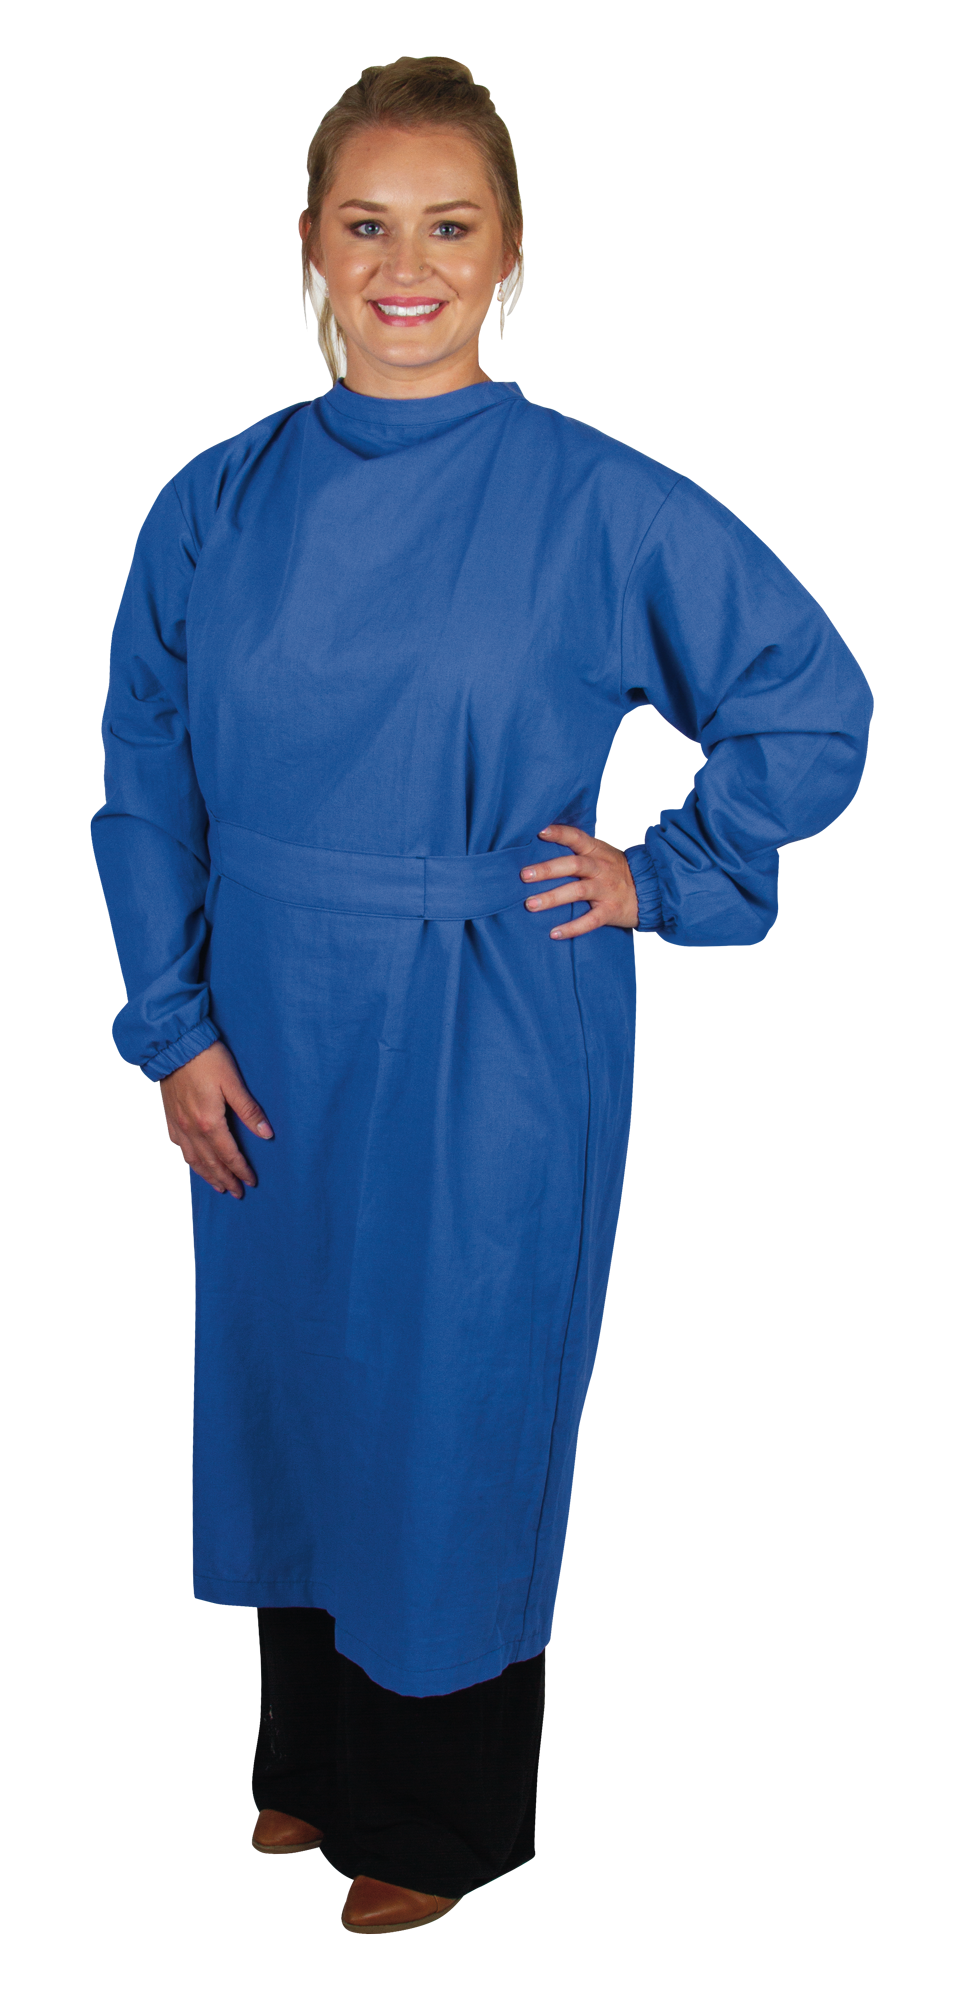 Thumb Loop Isolation Gown, Blue, Full Back, Thumb Loop Wrists, Made in the  USA